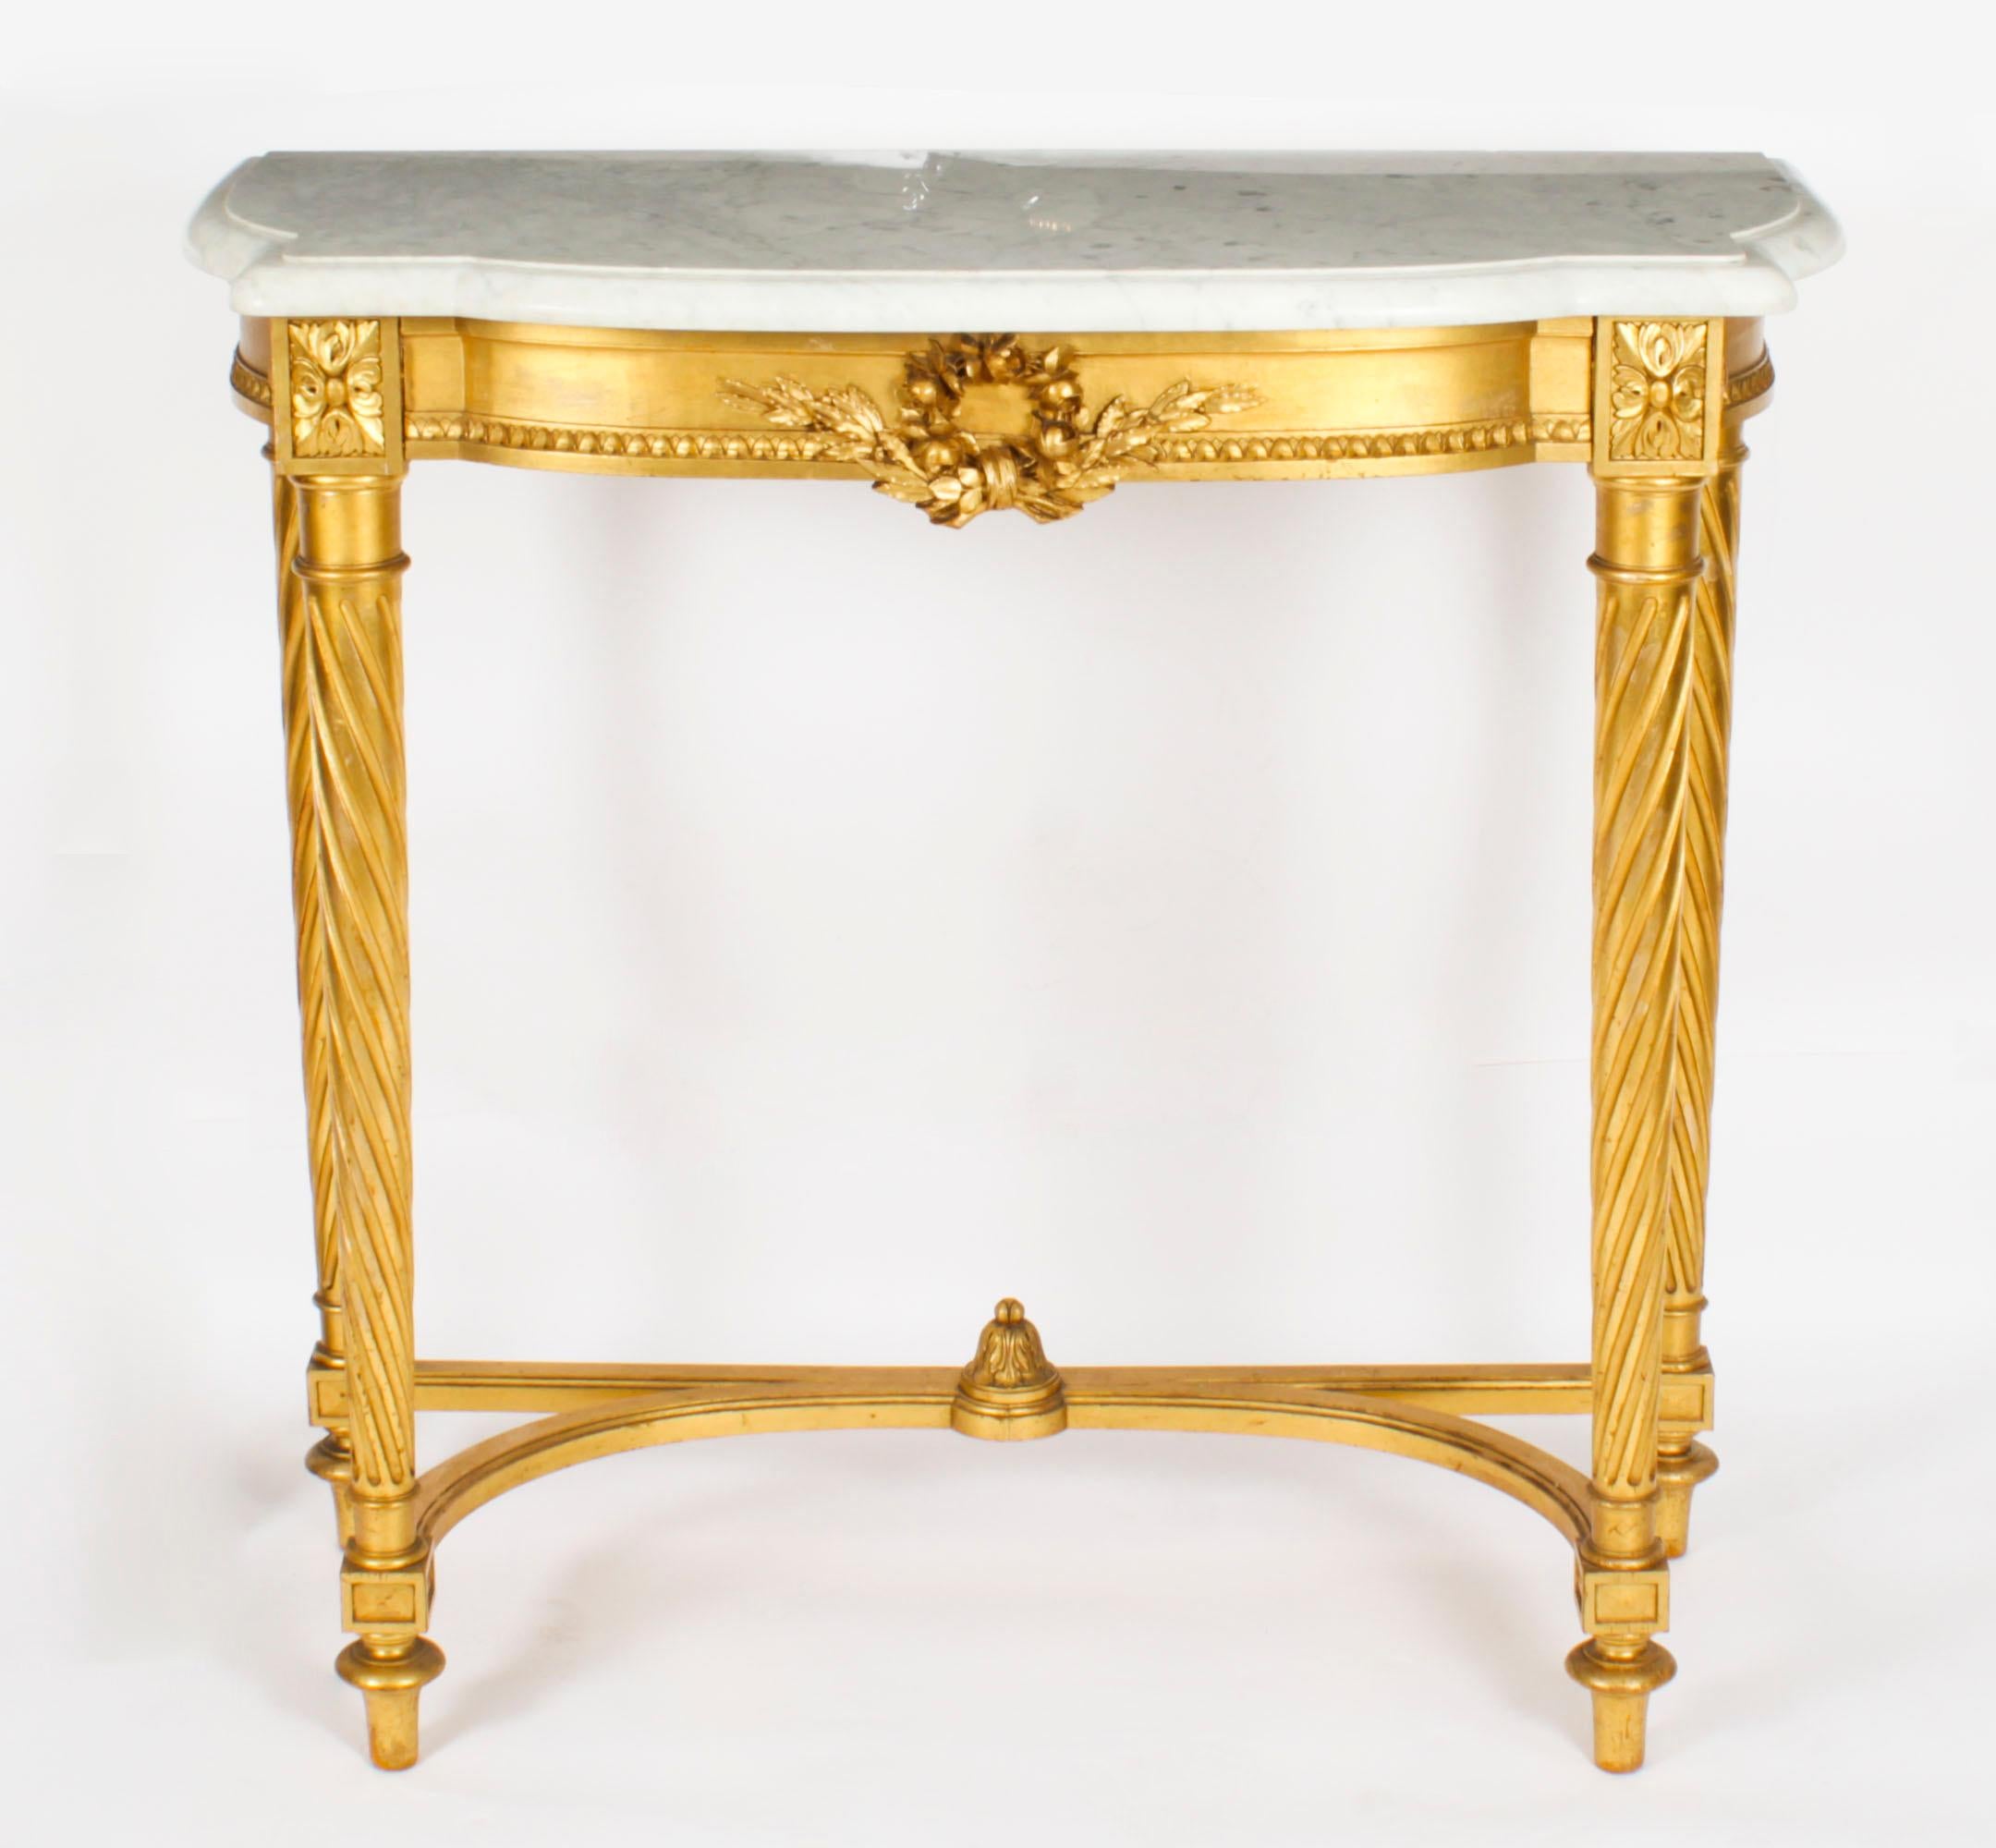 A fine antique French Napoleon III carved giltwood marble topped console table, circa 1870 in date.
 
This finely carved giltwood console table is surmounted with an exquisite shaped rectangular Italian white Carrara marble top above a frieze with